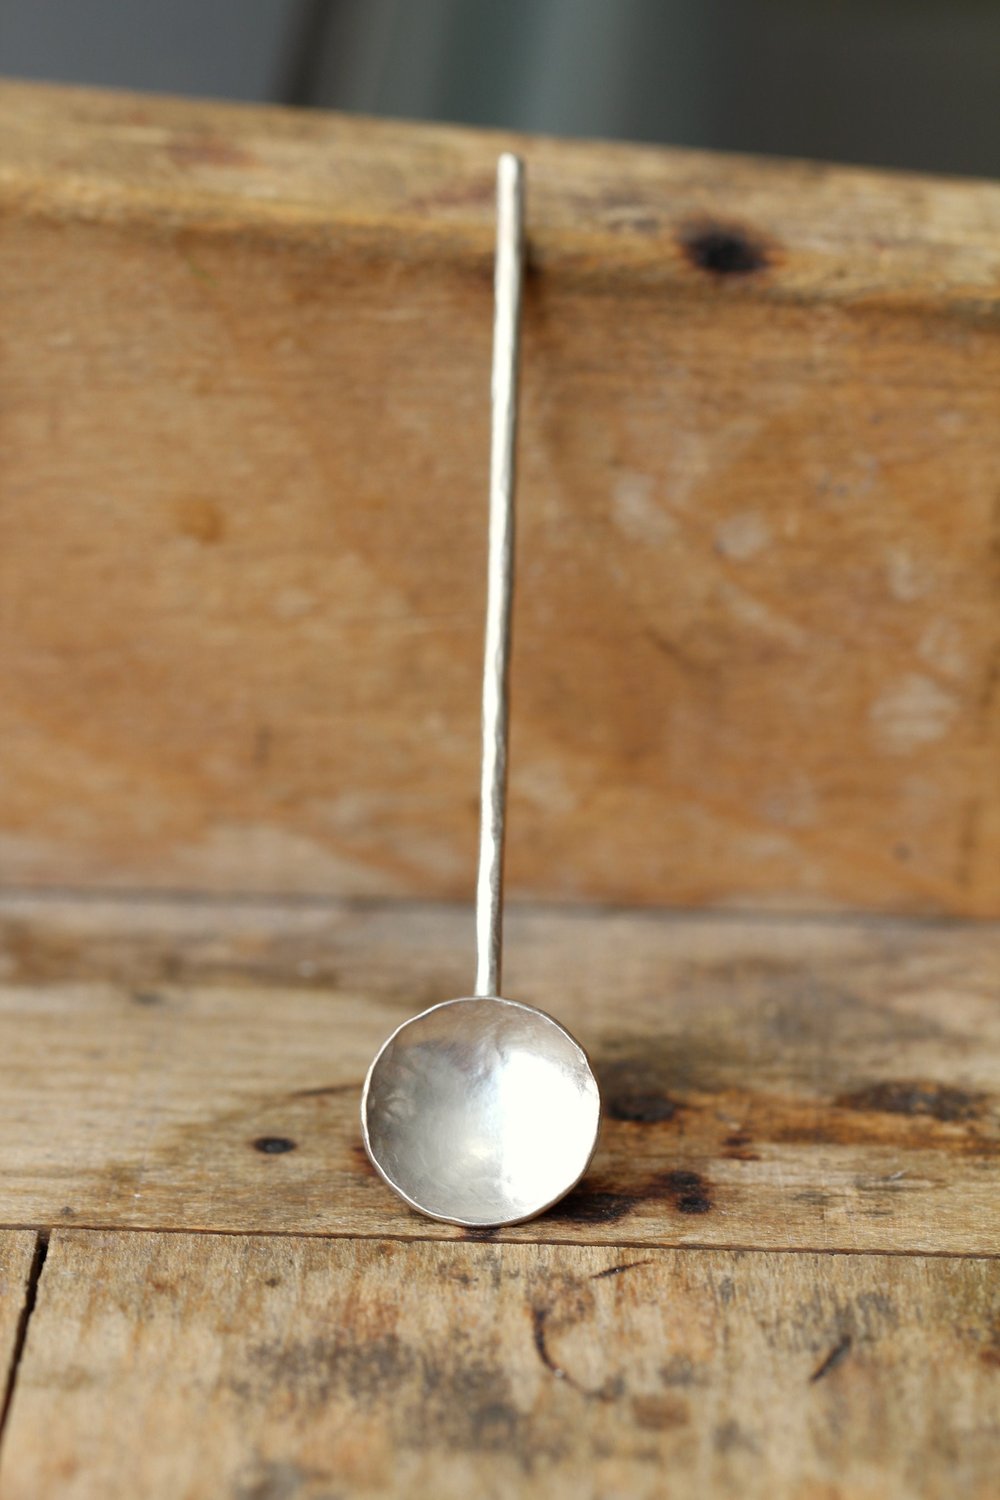 Image of RR Designs Sterling Silver Spoon #7 with round textured handle - Size Medium